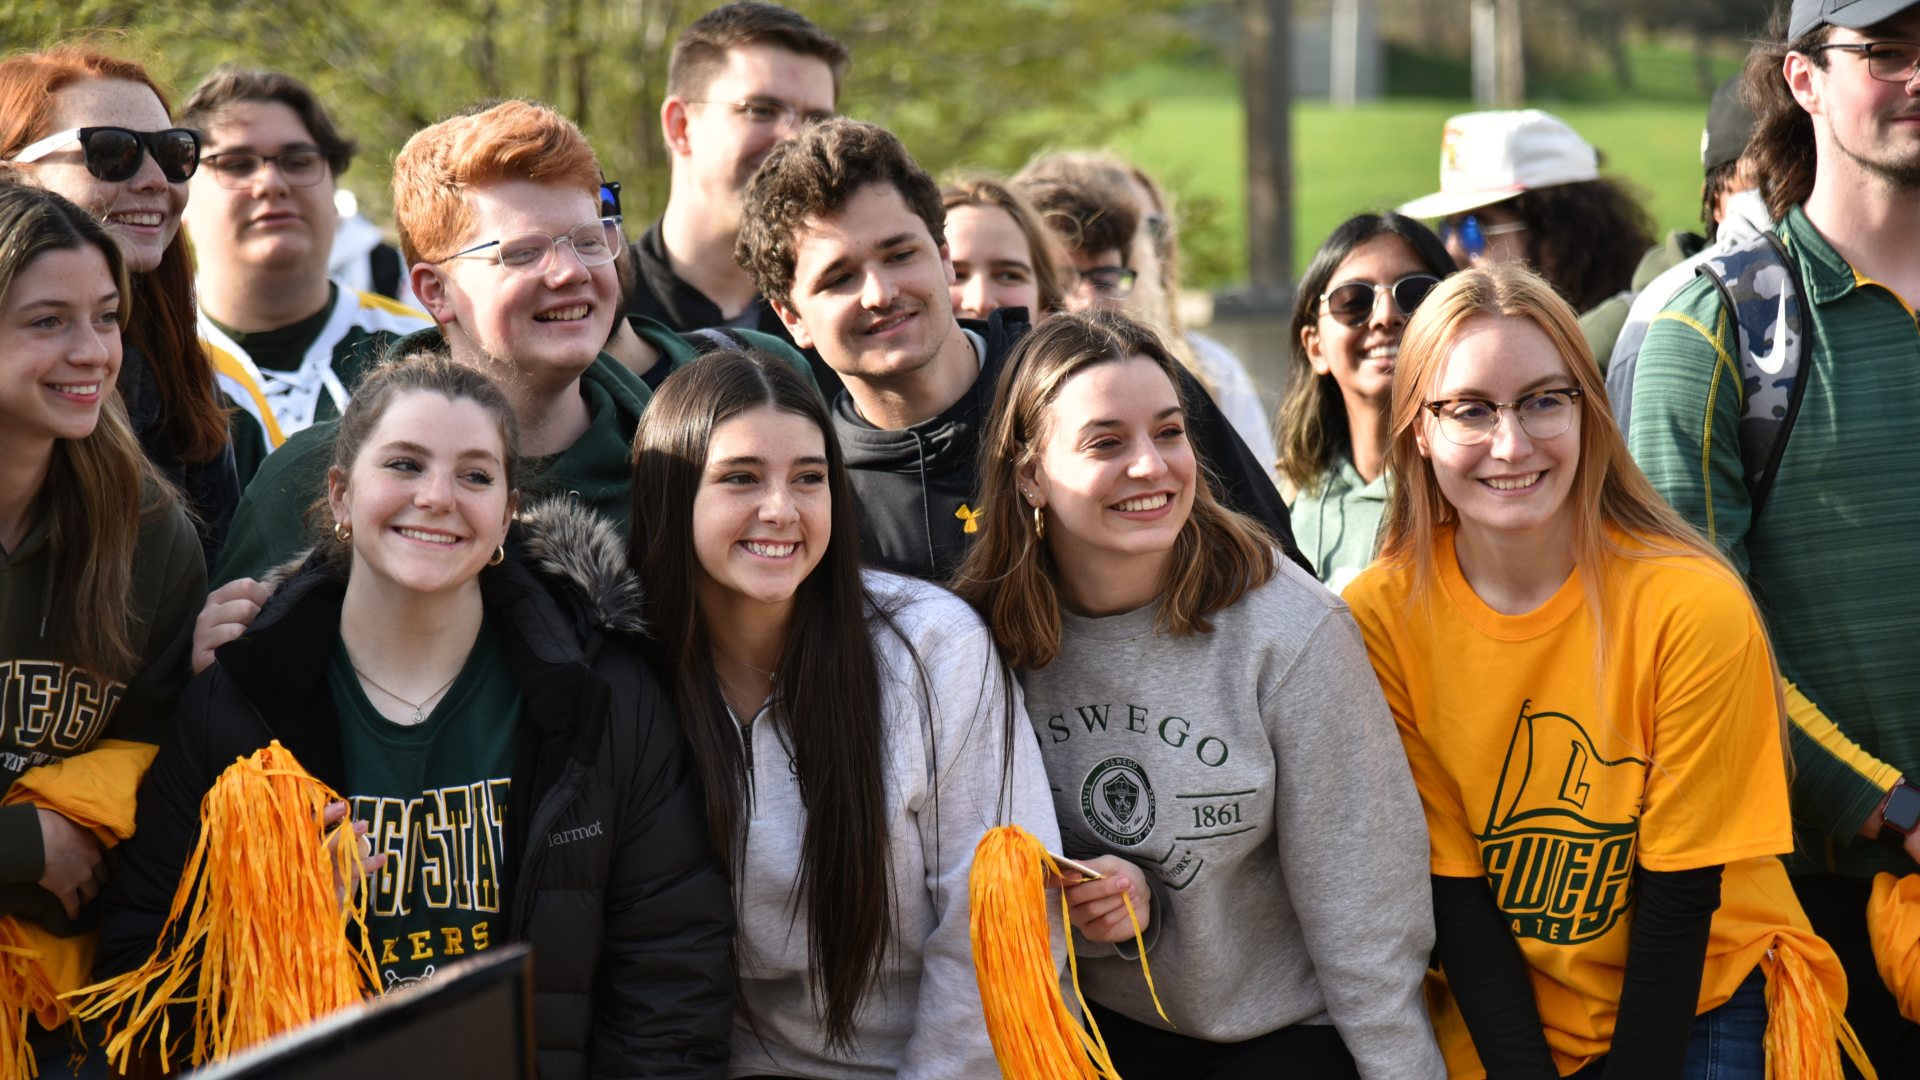 A group of students wearing Oswego shirts and holding yellow and green pompoms smile for the camera